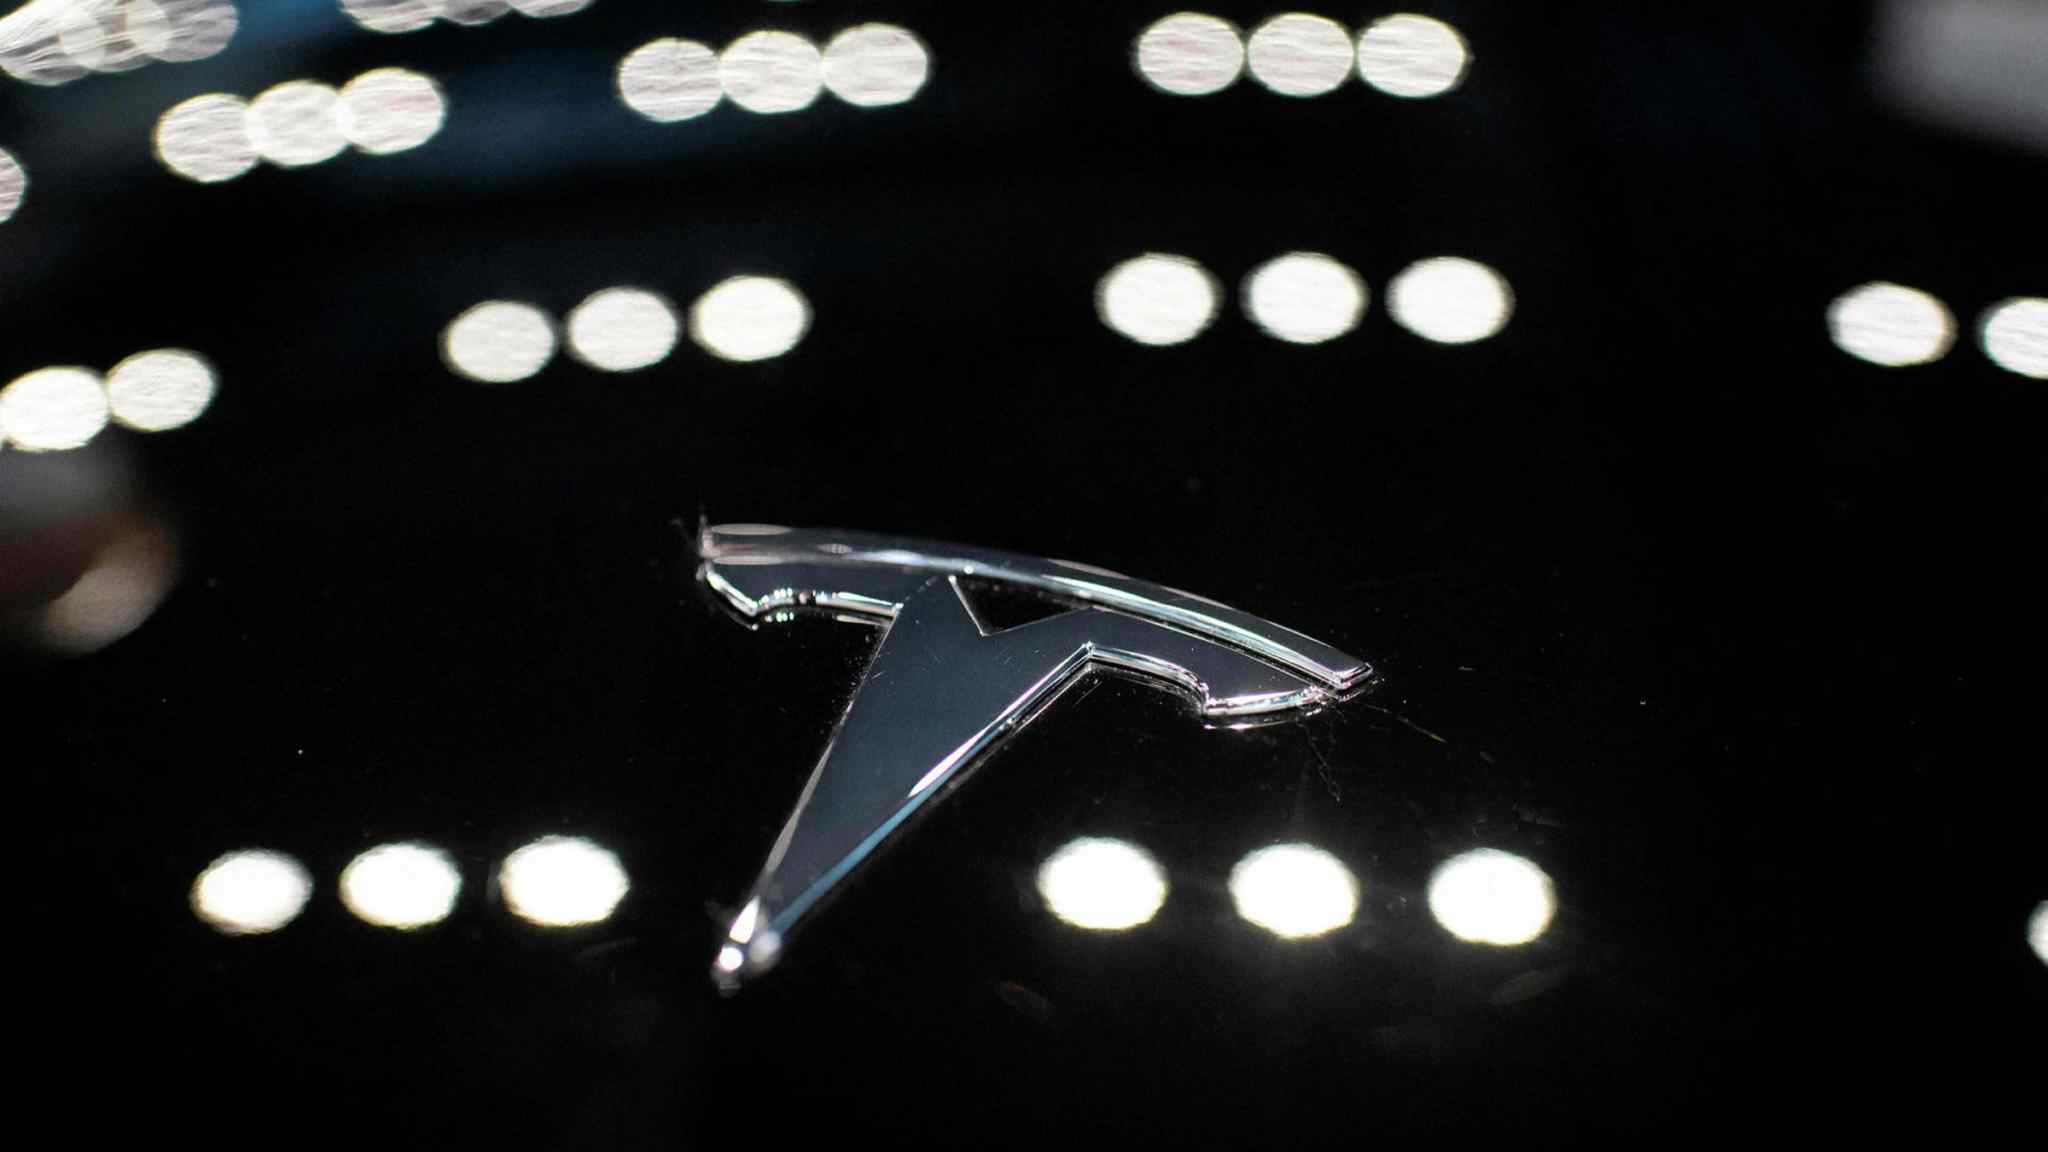 Tesla: production, not new products, will drive its stock